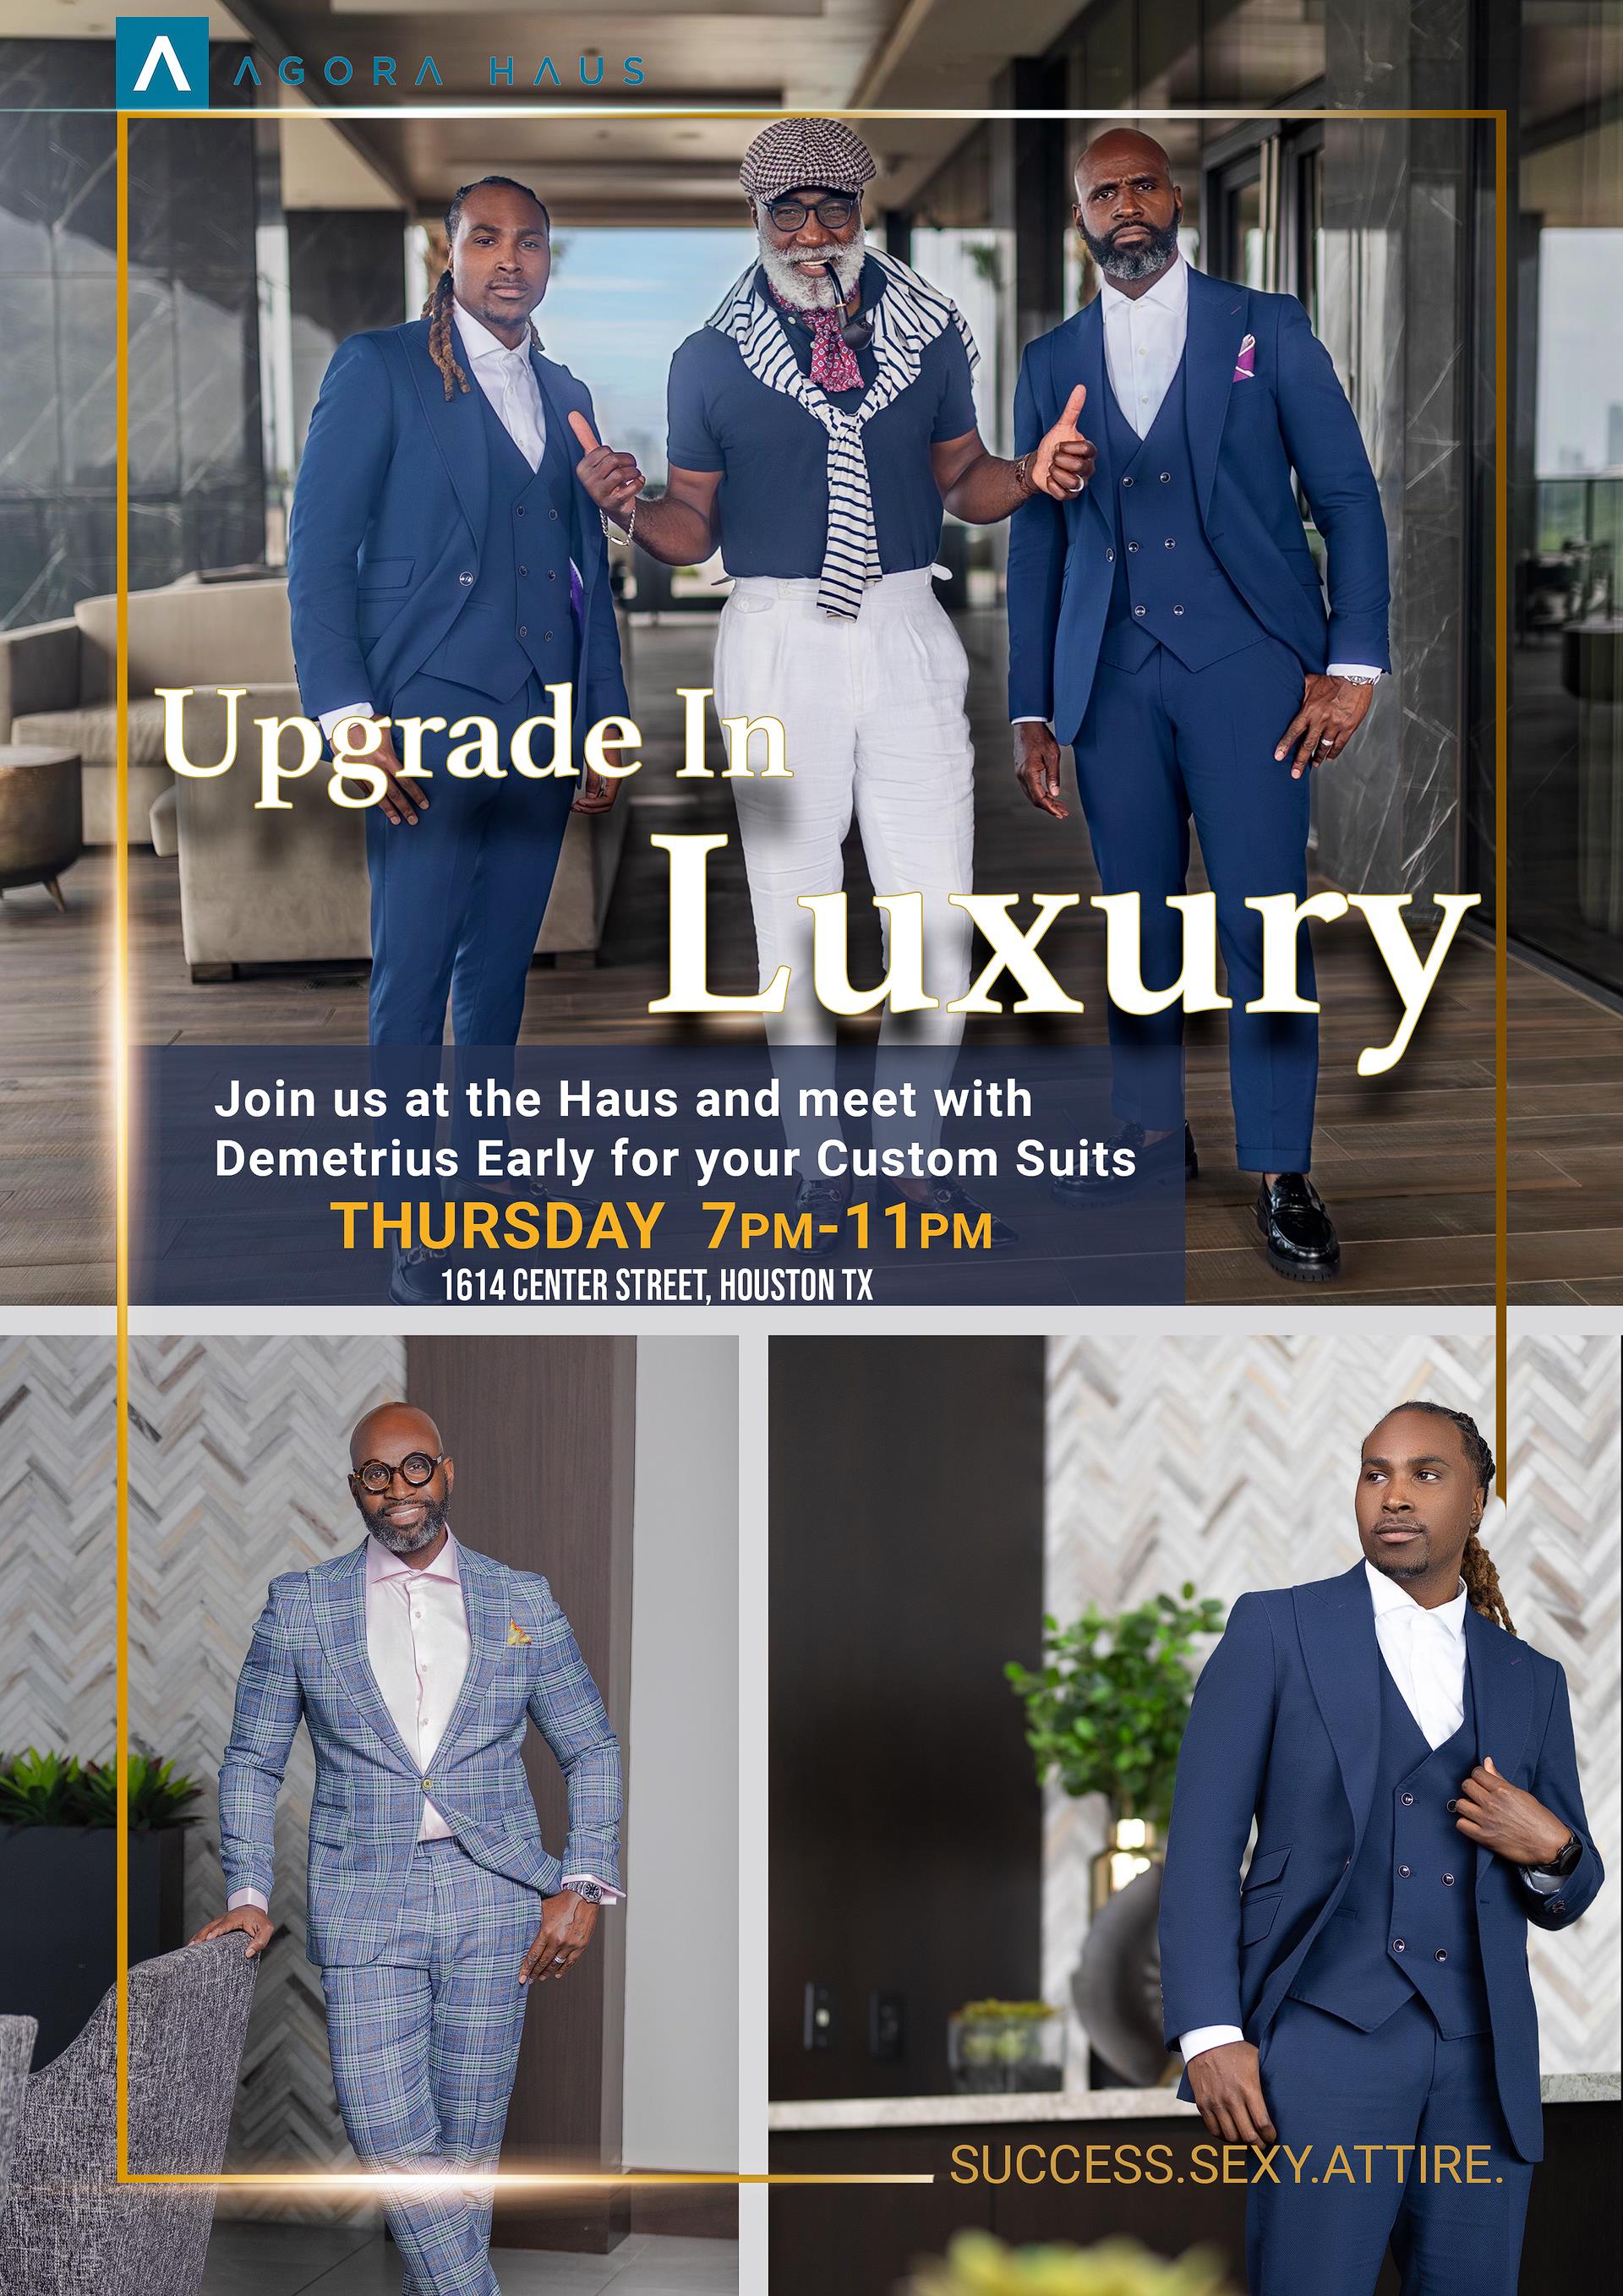 Upgrade to Luxury: Hosted by Demetrius Early